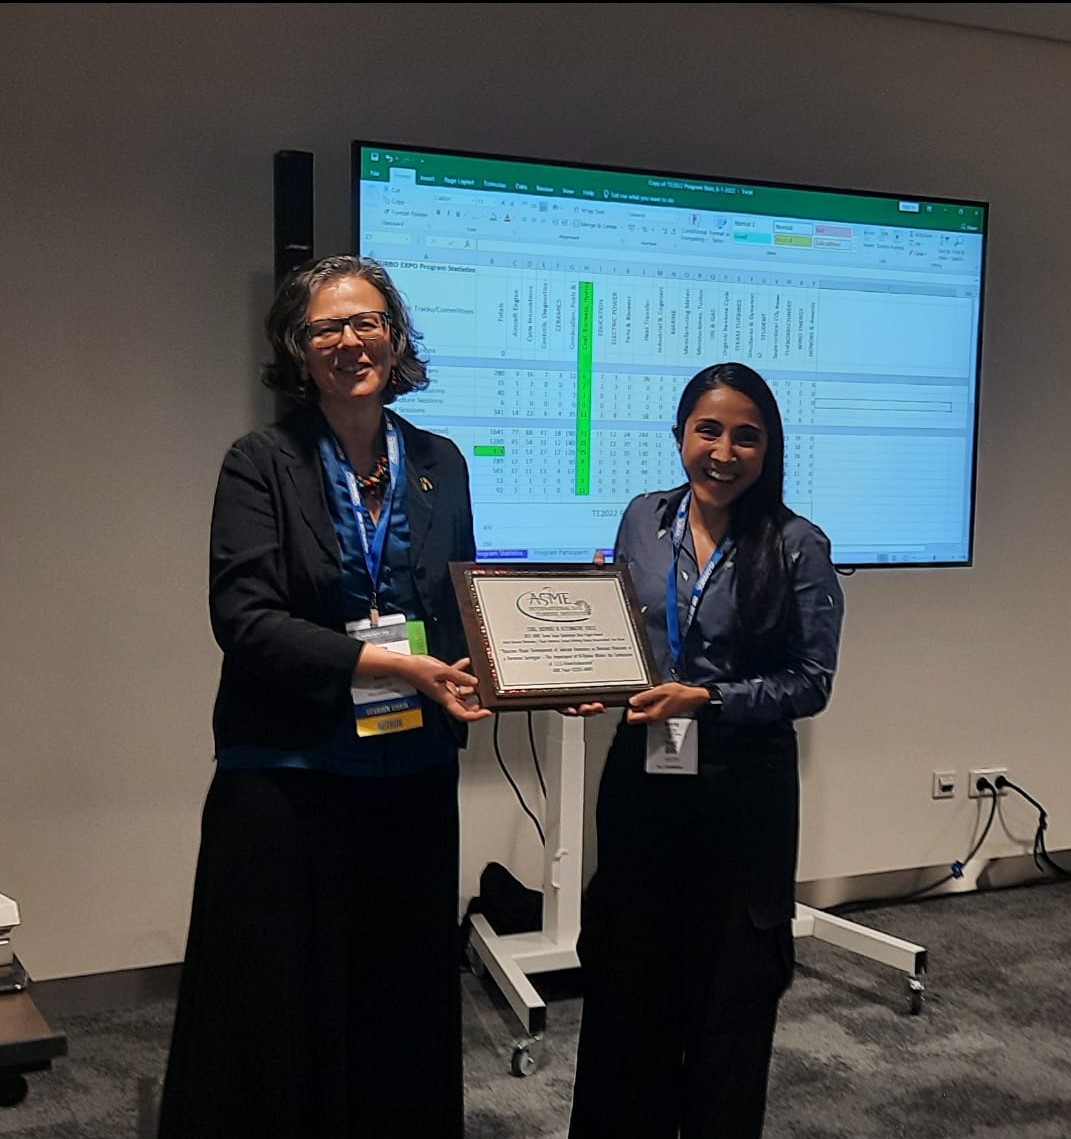 Astrid Ramirez received the 2021 ASME Turbo Committee Best Paper Award